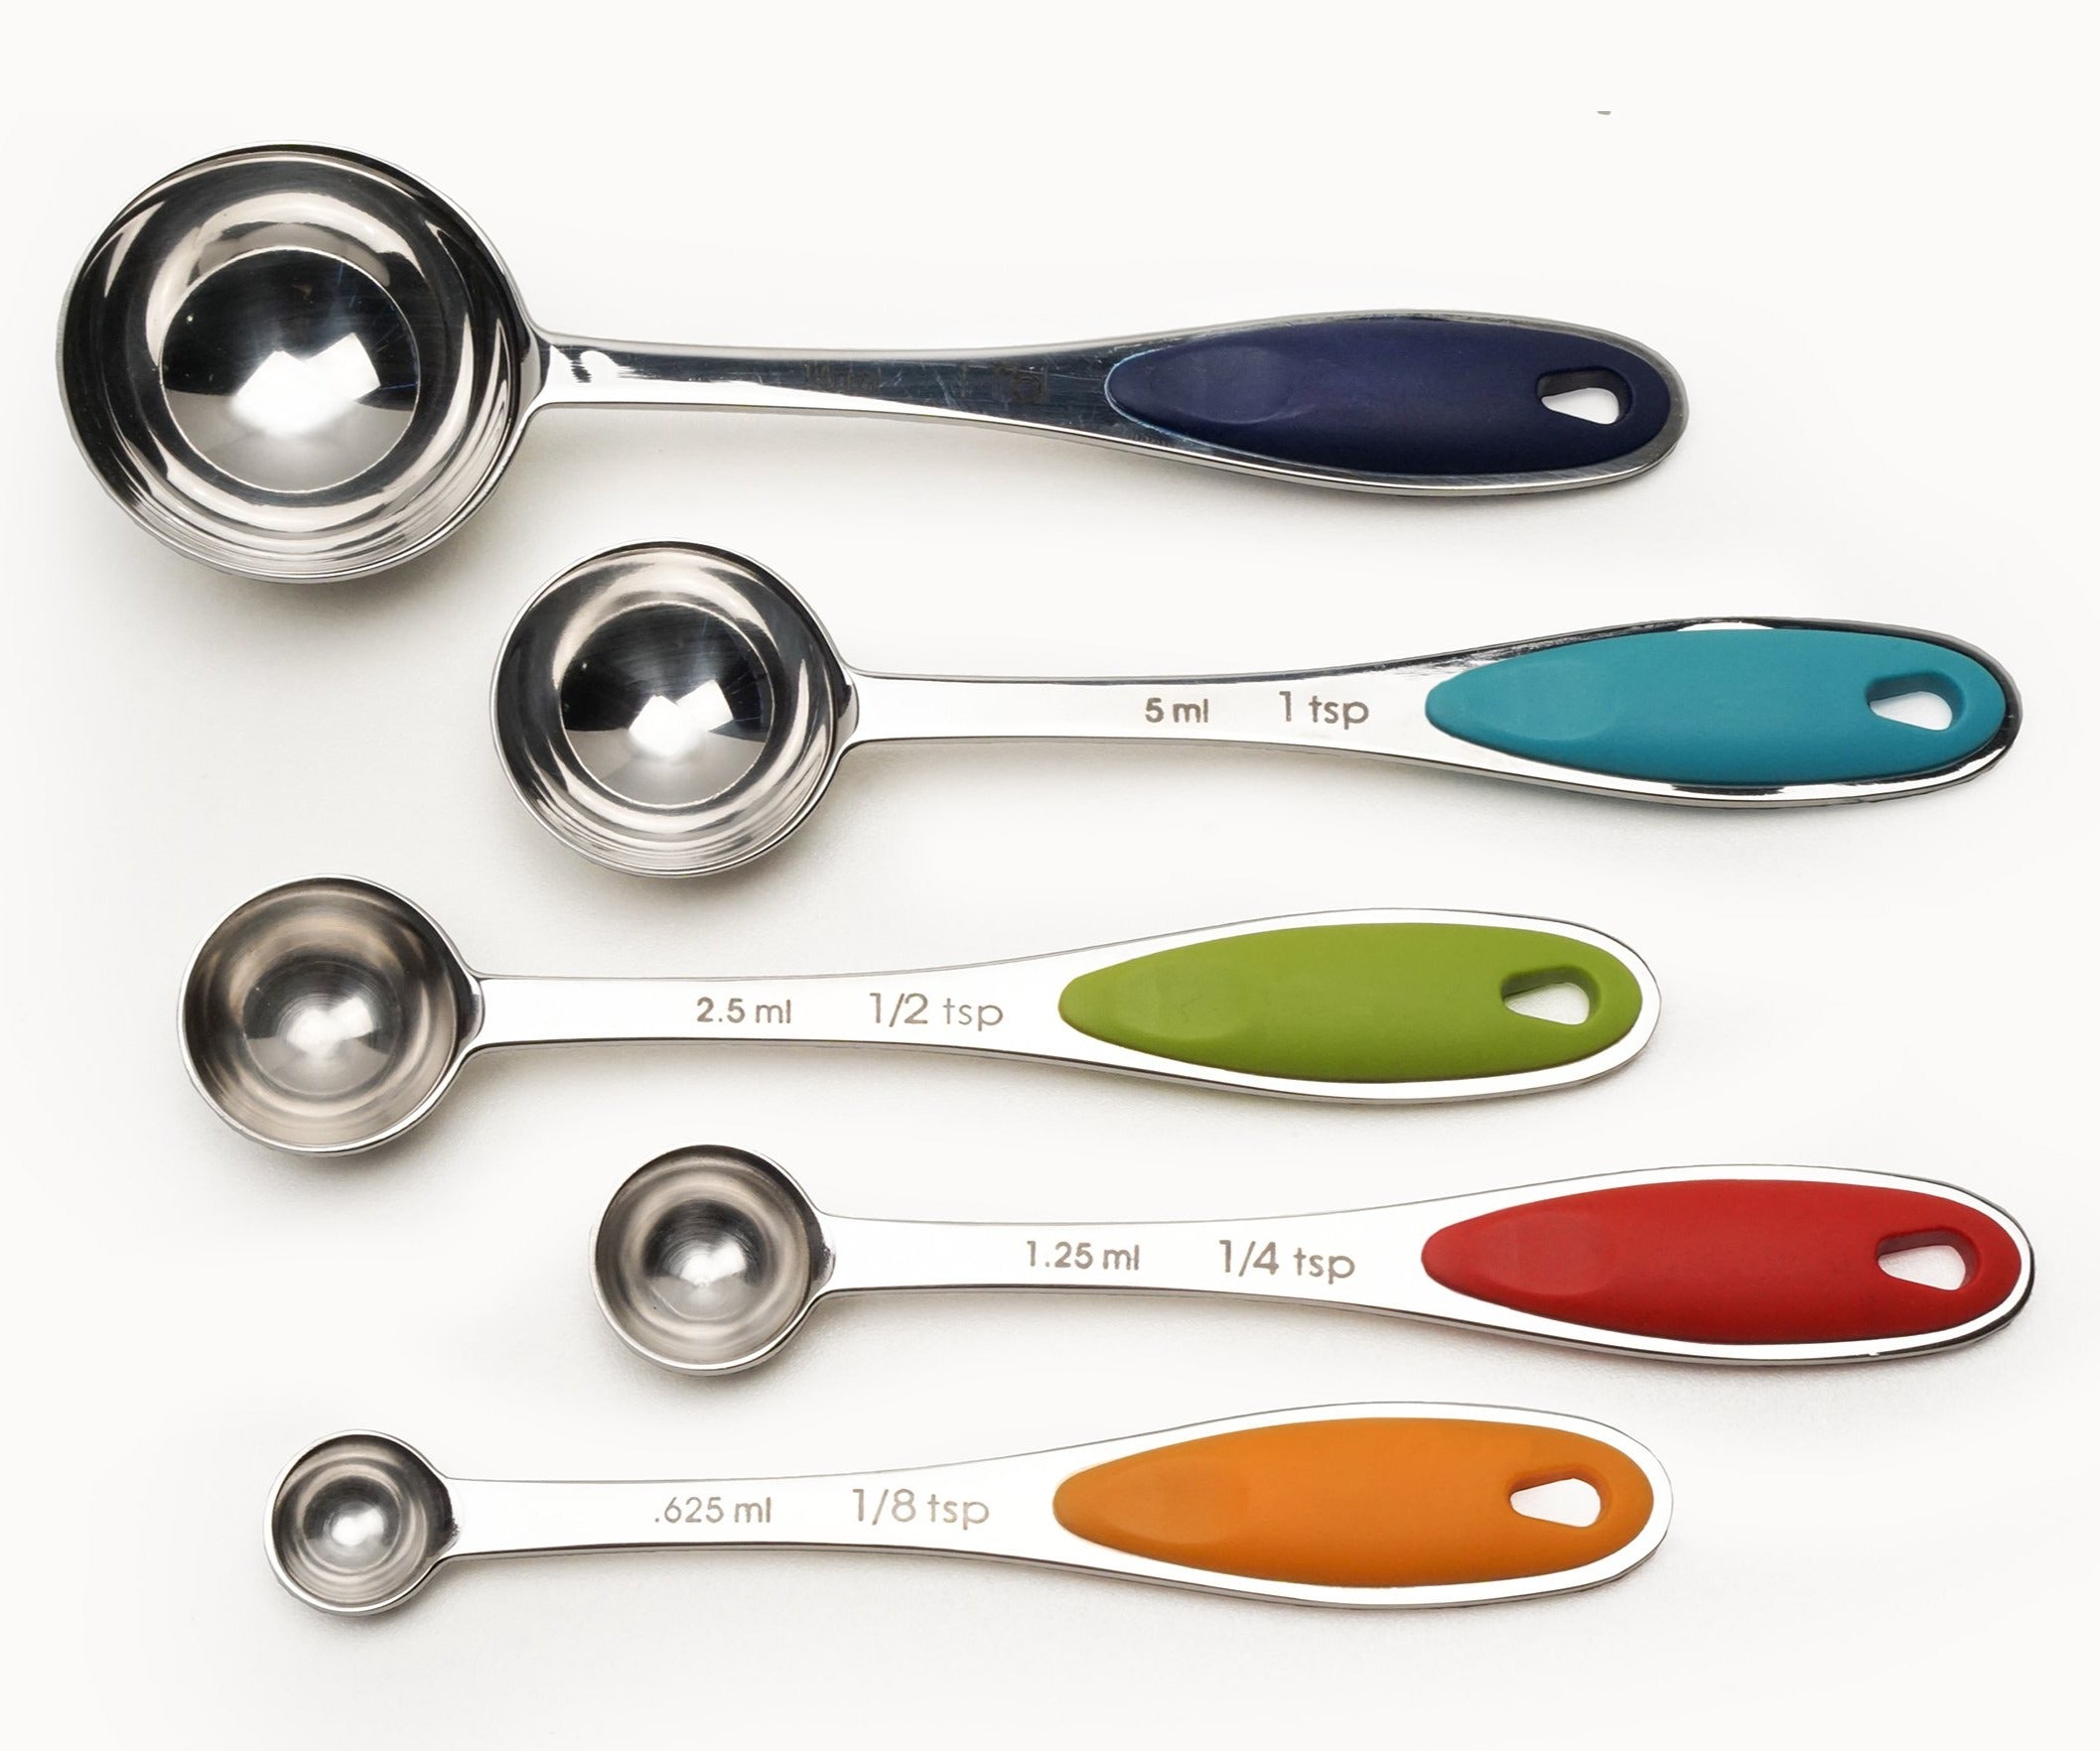 Rsvp Dill Endurance 18/8 Stainless Steel Spice Measuring Spoons, Set of 6